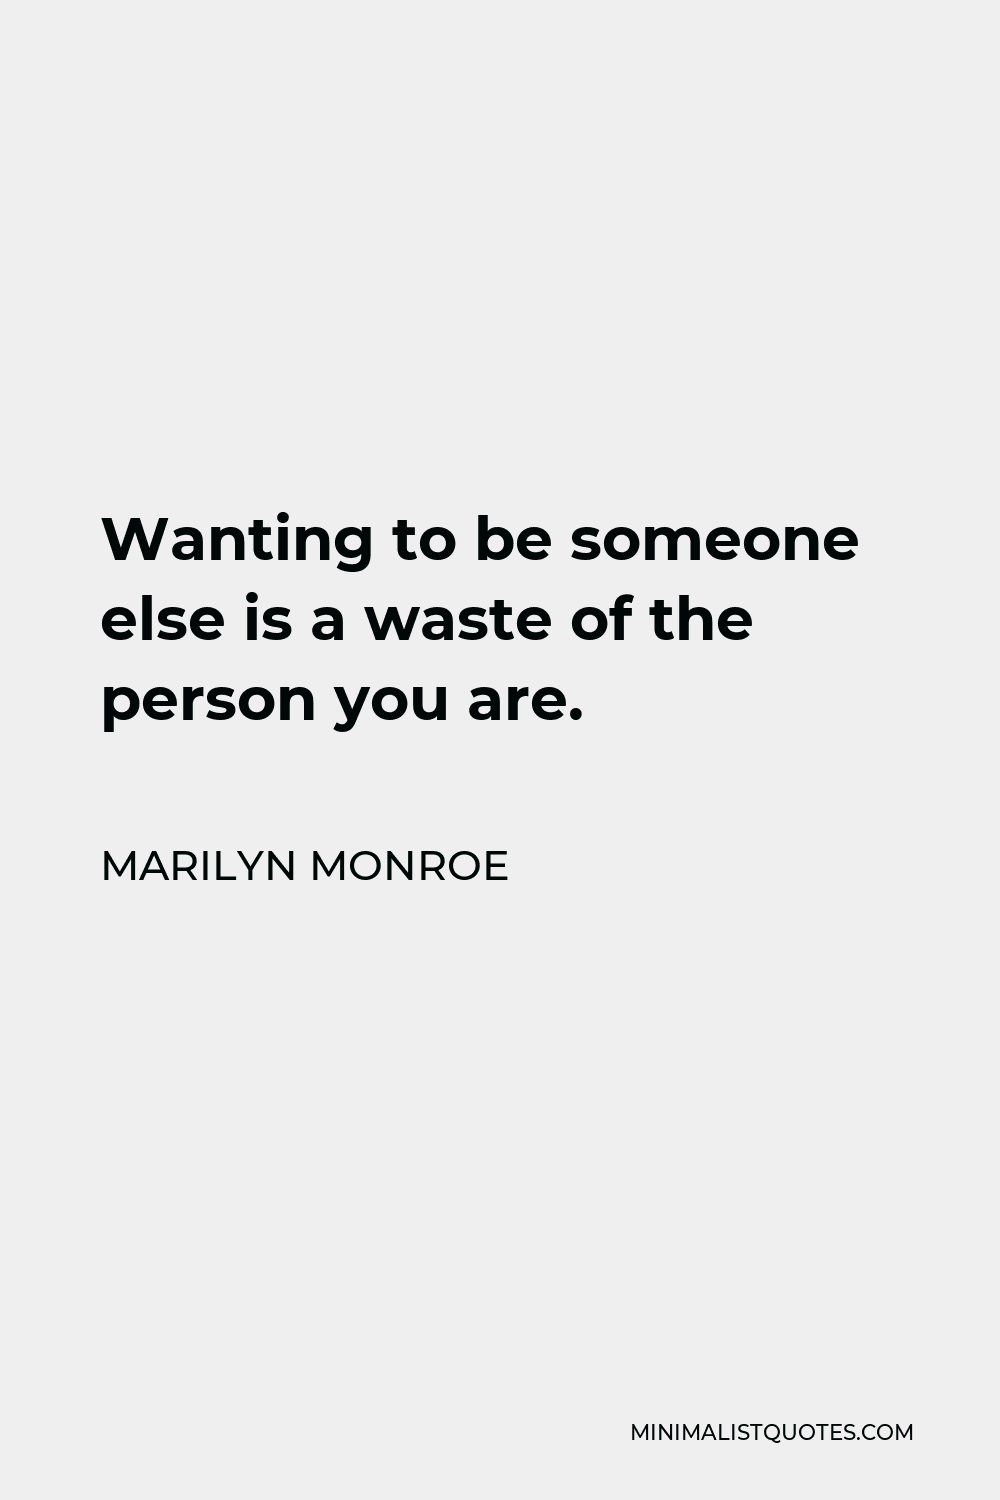 Marilyn Monroe Quote - Wanting to be someone else is a waste of the person you are.